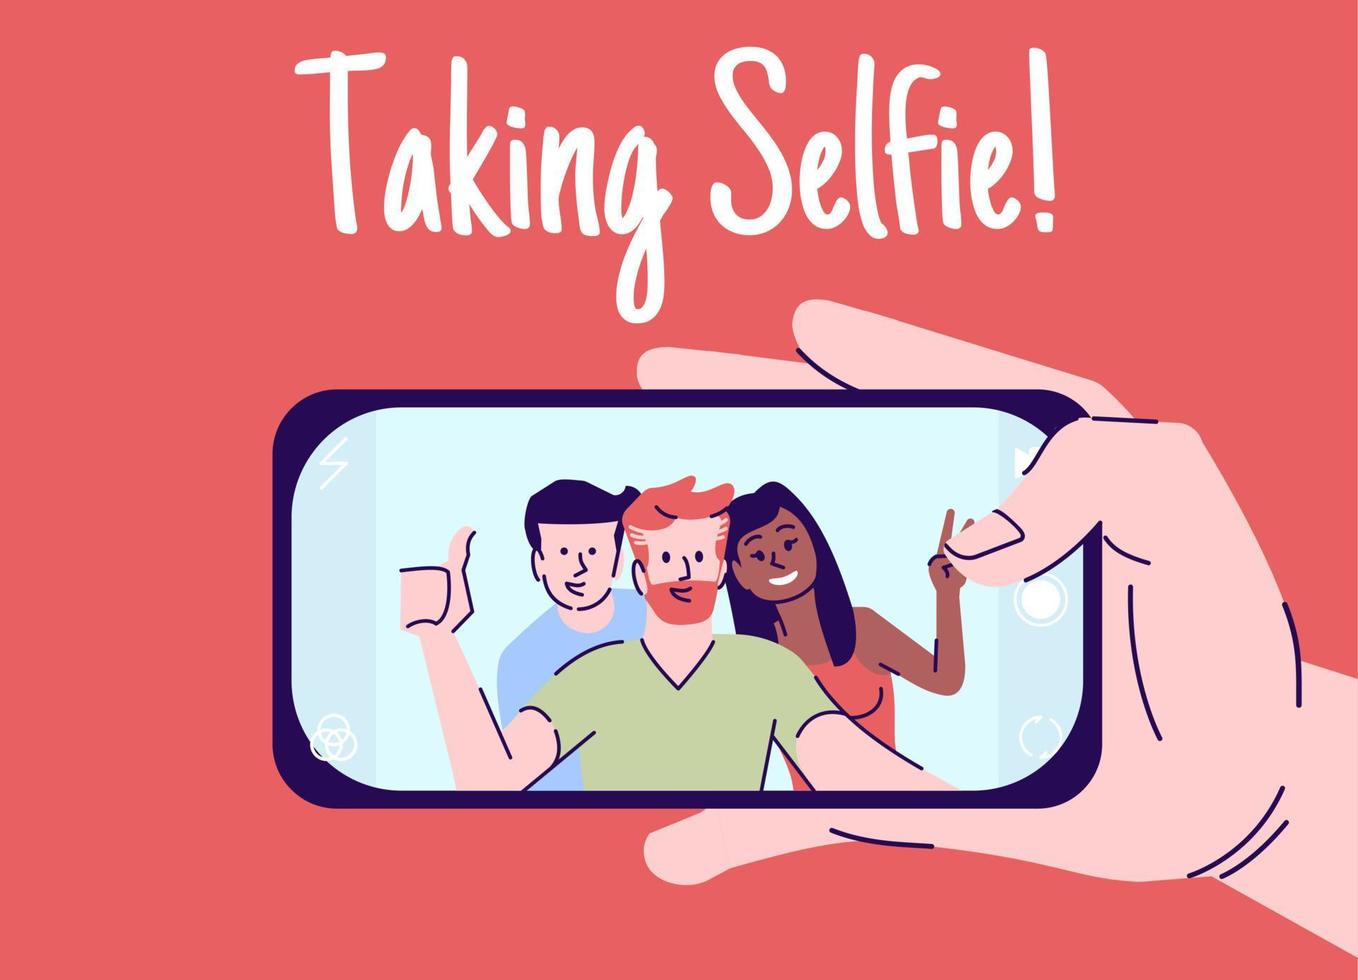 Taking selfie flat vector illustration. Hand with smartphone making self photo. Friends meeting picture. Happy people portrait on phone cartoon character with outline elements on red background